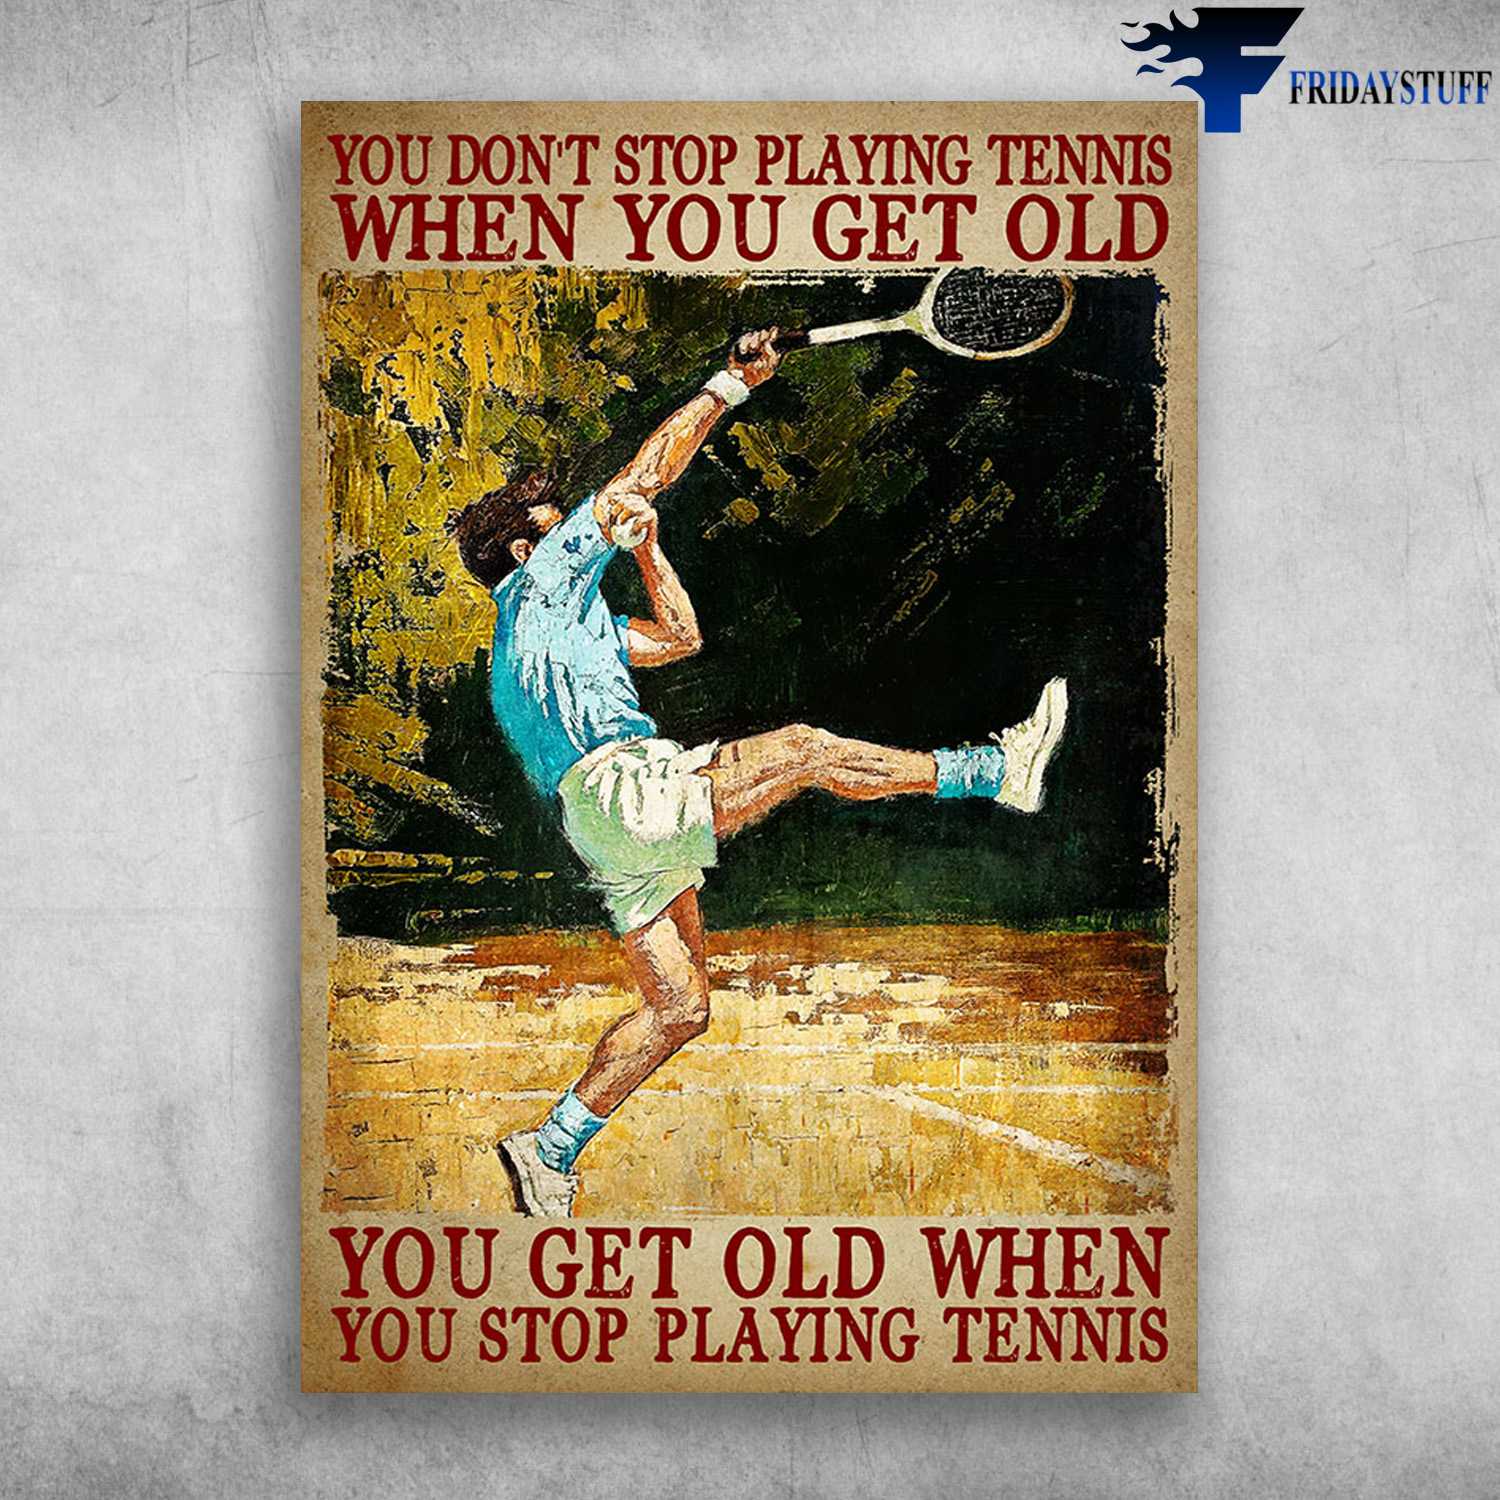 Tennis Player, Tennis Poster - You Don't Stop Playing Tennis When You Get Old, You Get Old When You Stop Playing Tennis